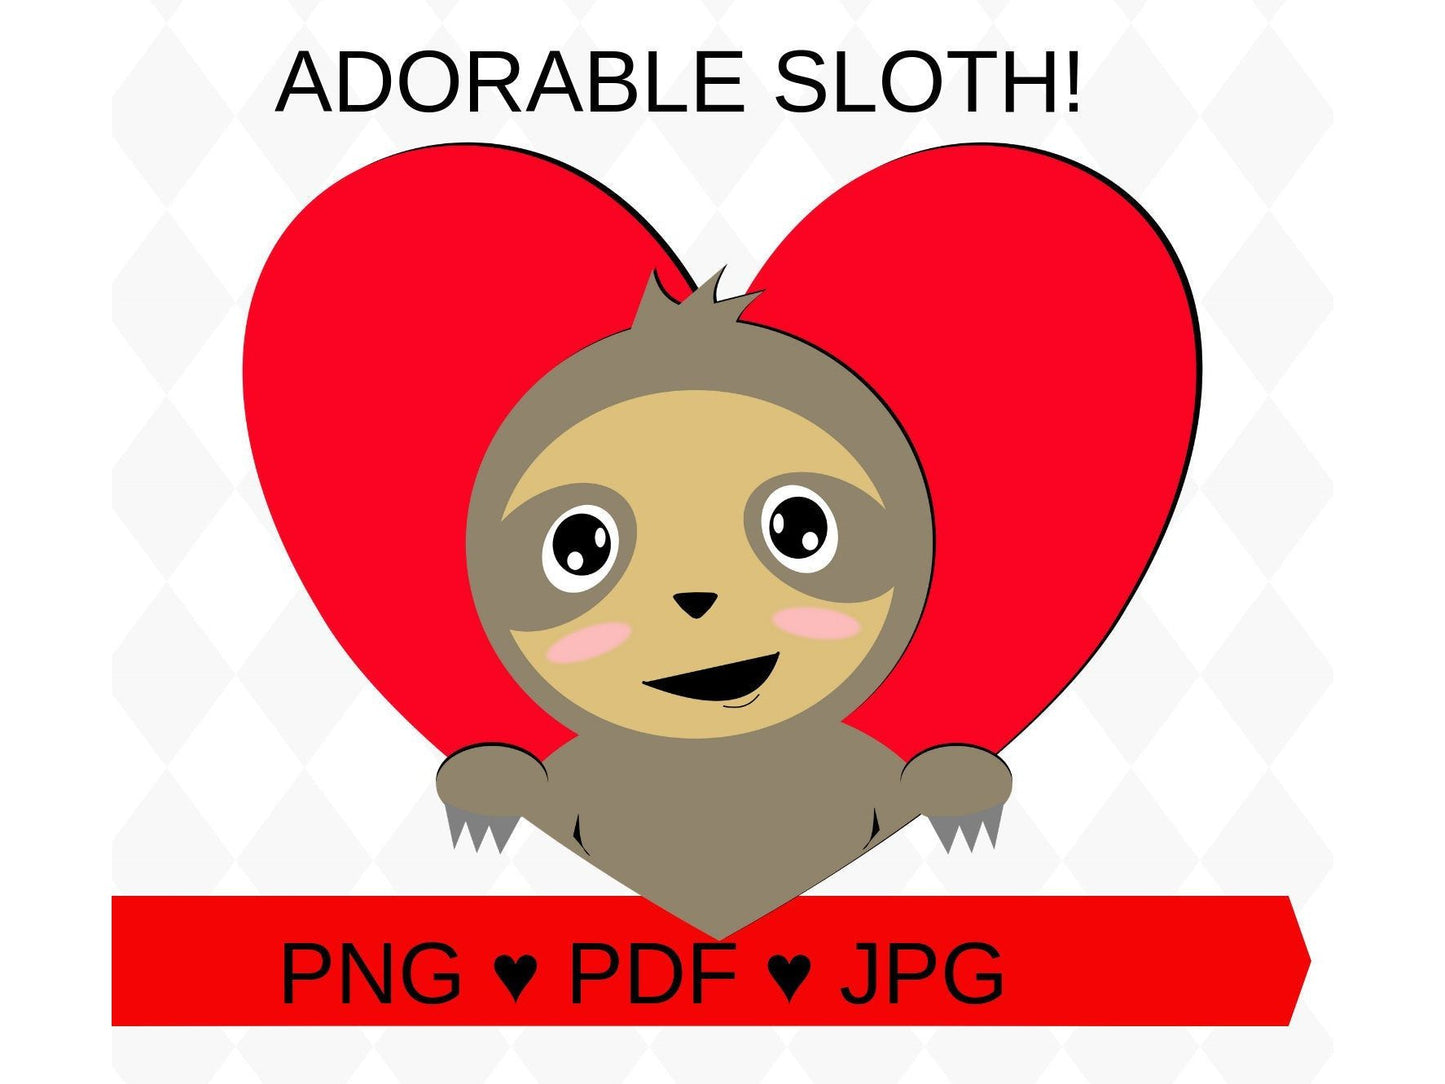 Cute Sloth Heart Clip Art - Valentine's Day Clip Art for Sloth Lovers - INSTANT DOWNLOAD - pdf png jpg DIY Valentines Day Crafts Cards Gifts